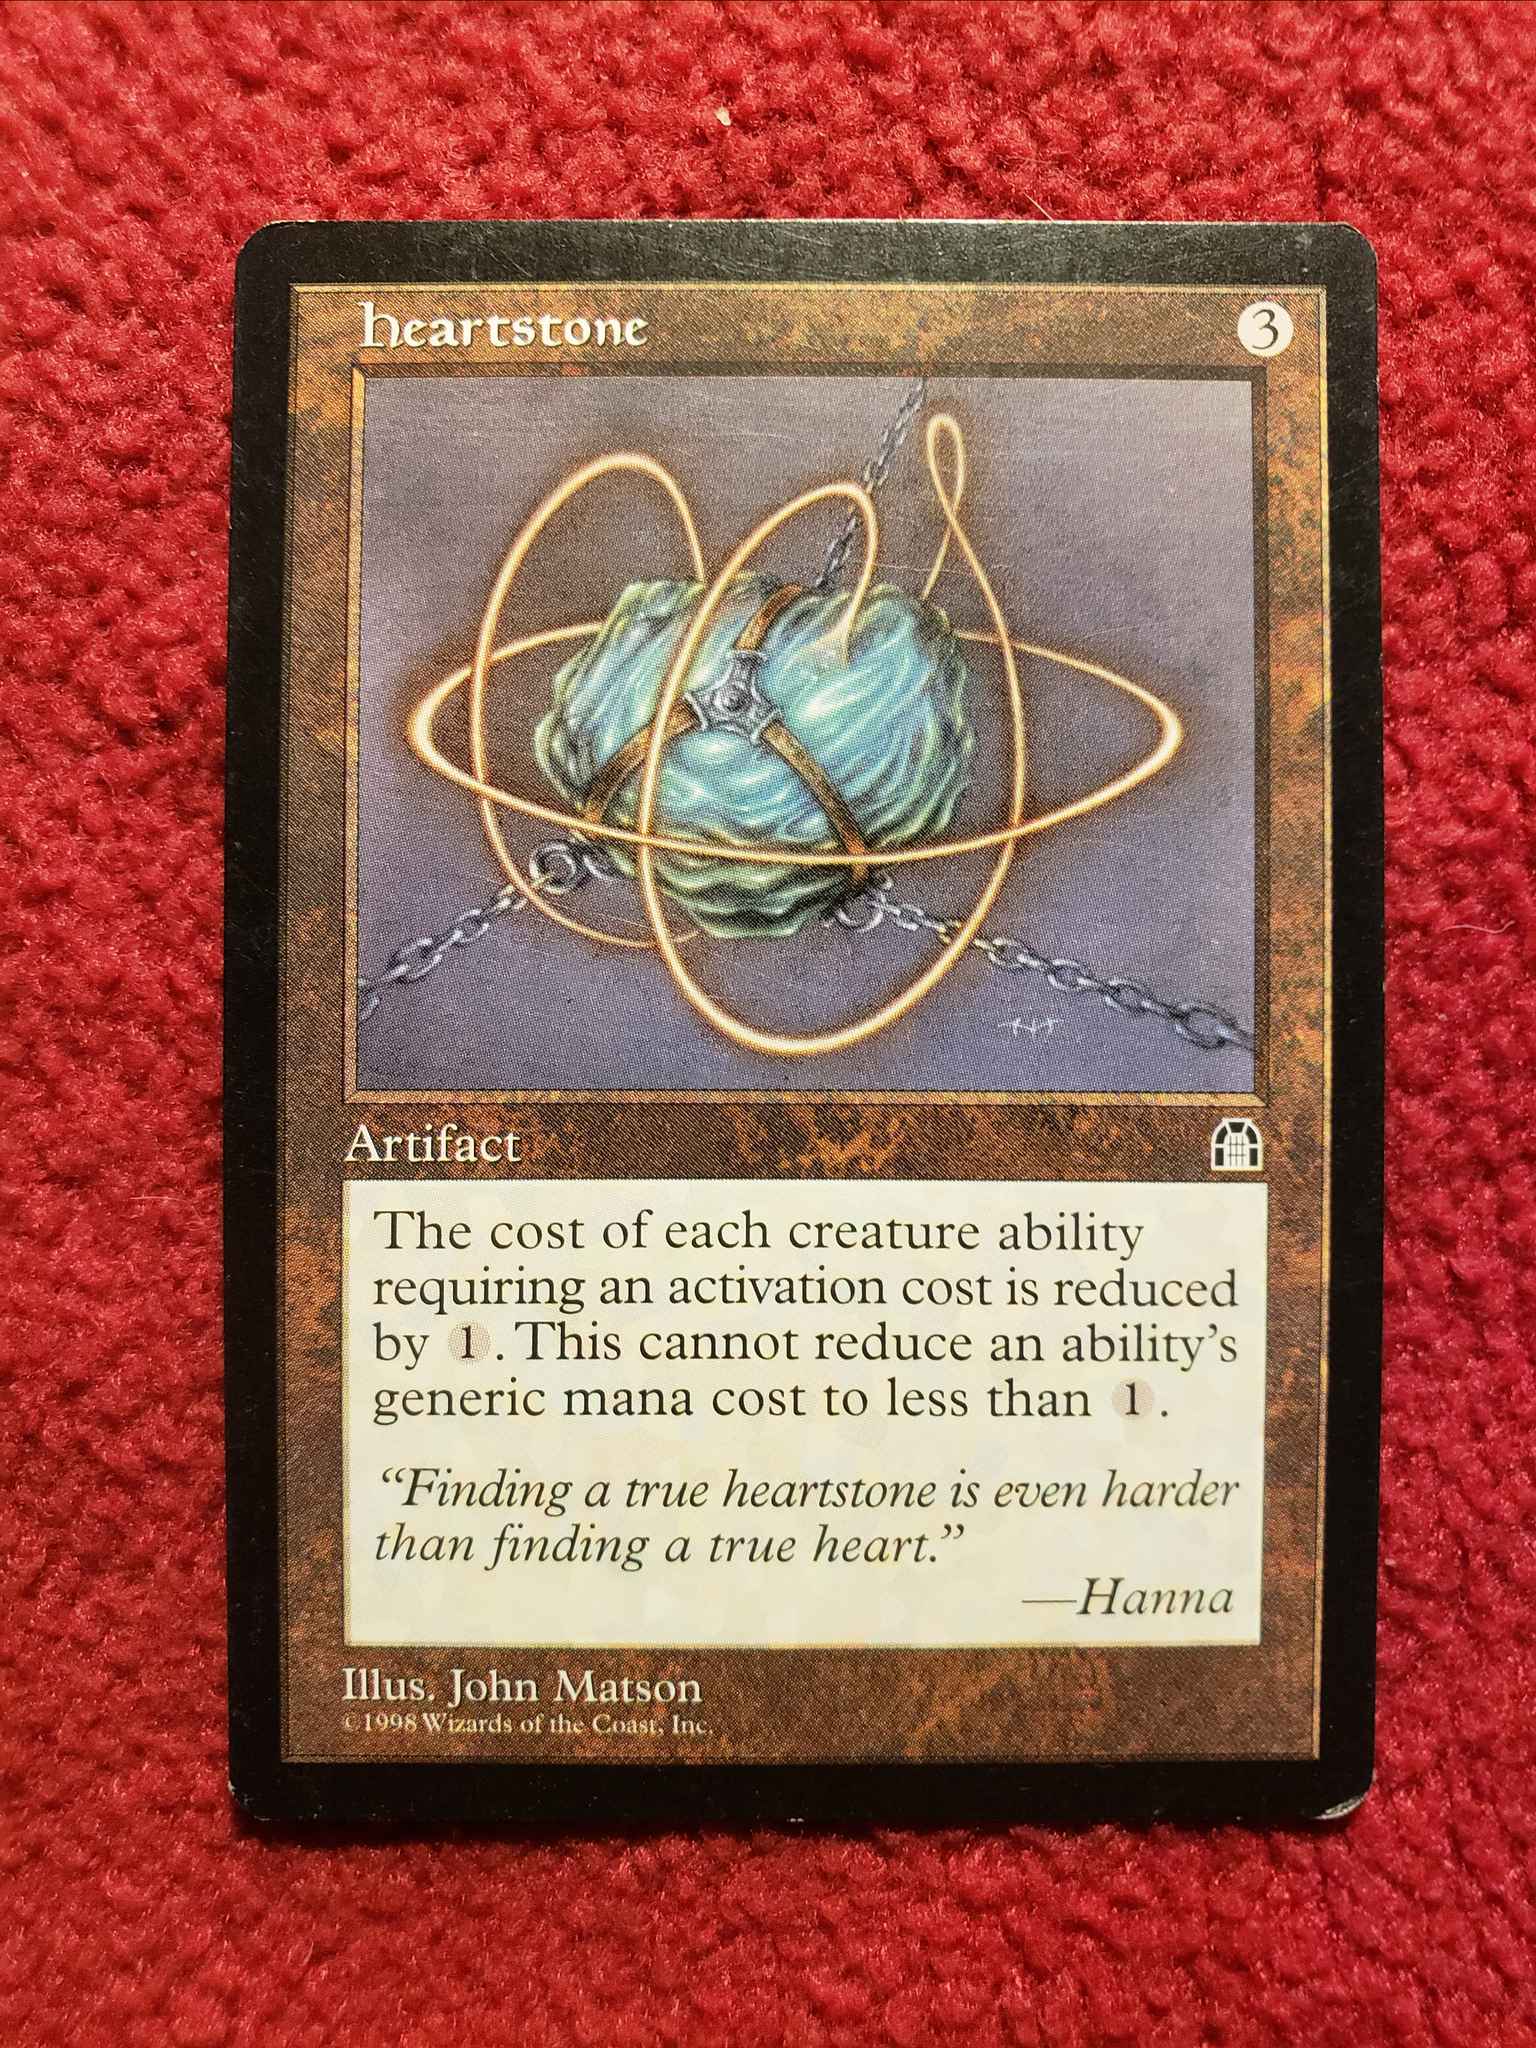 4x Heartstone Stronghold x4 English Magic ¥ Multiple Available ¥